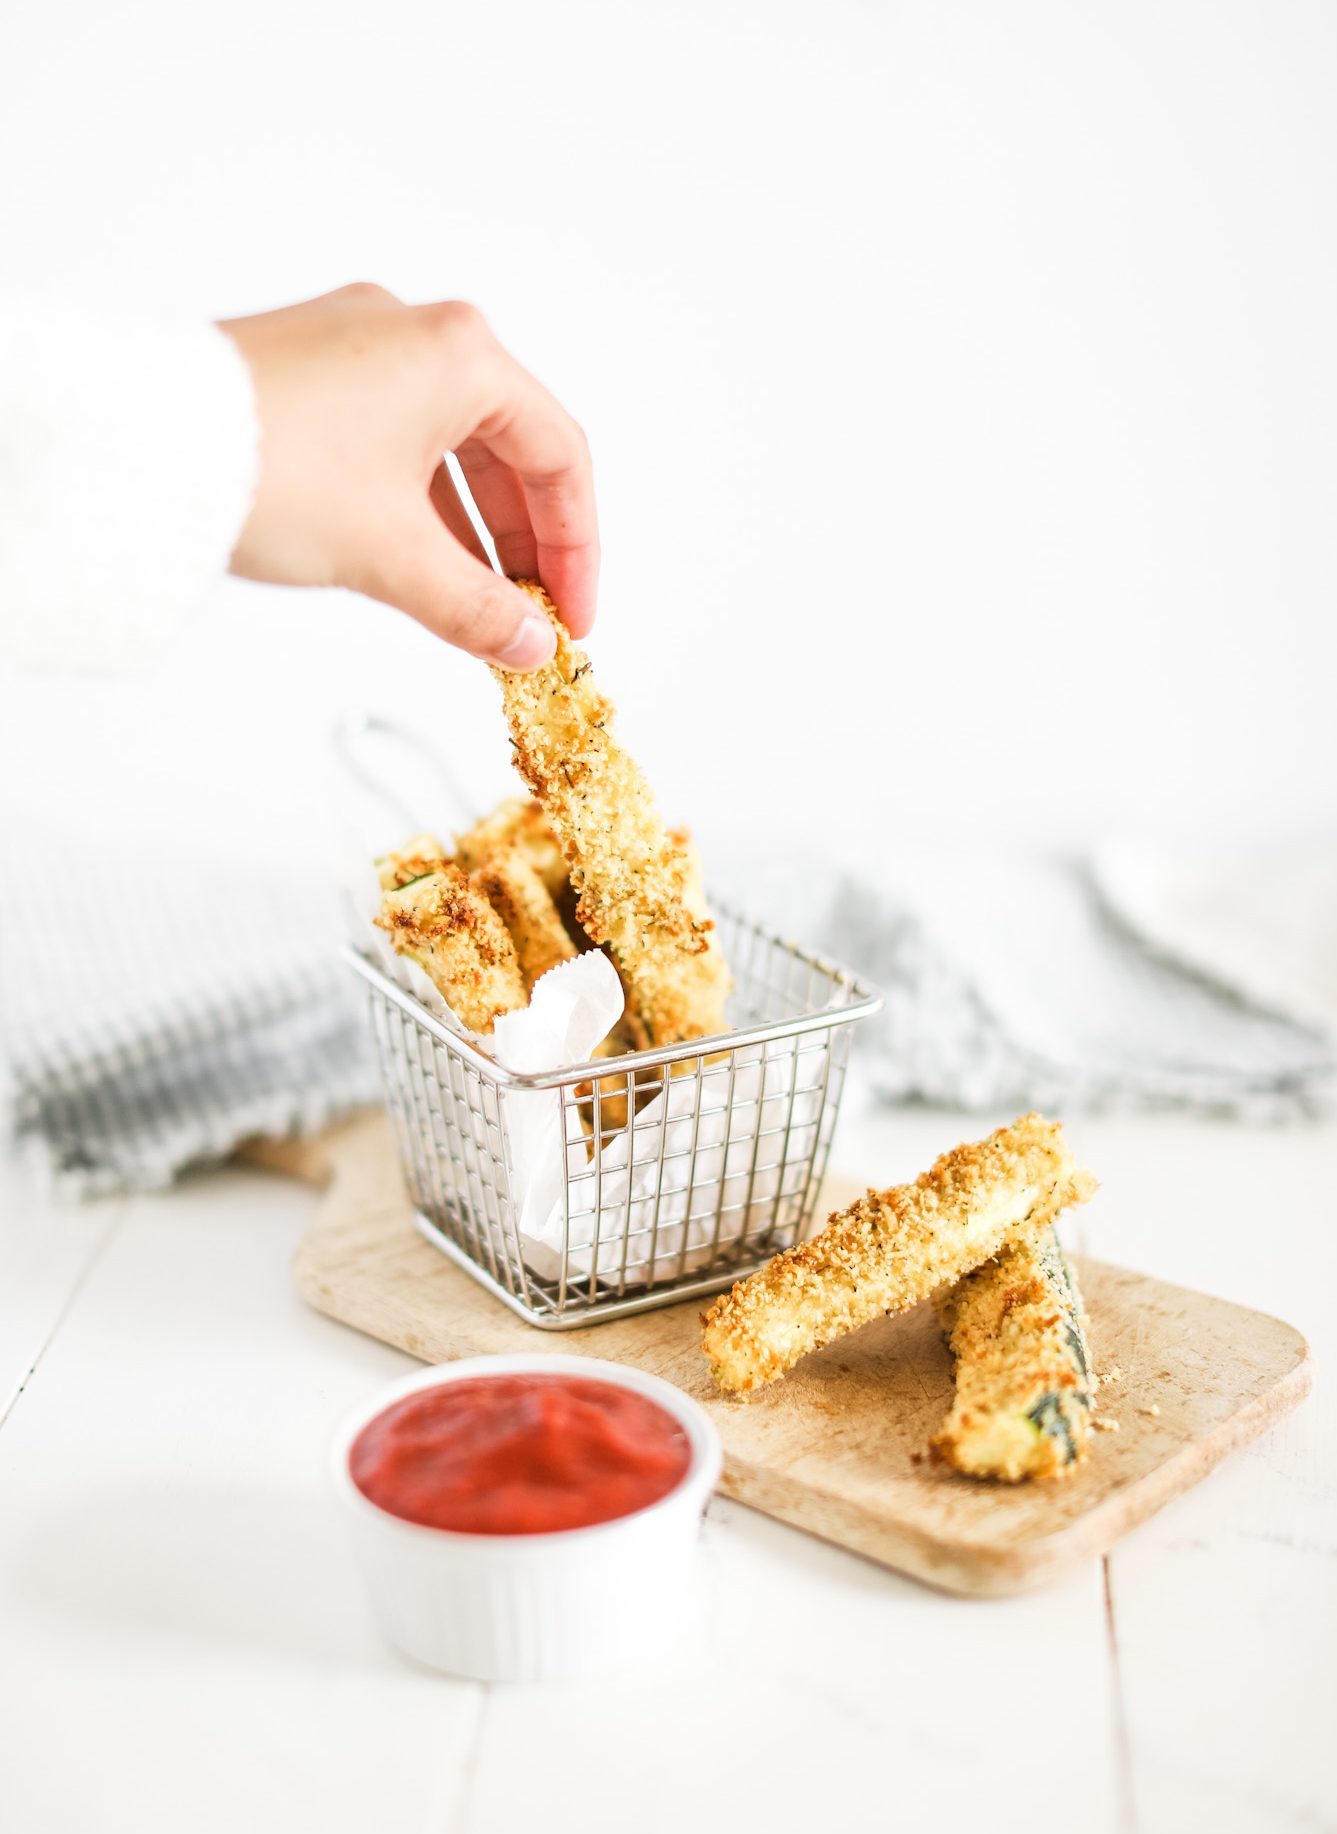 a hand grabbing Baked Zucchini Fries